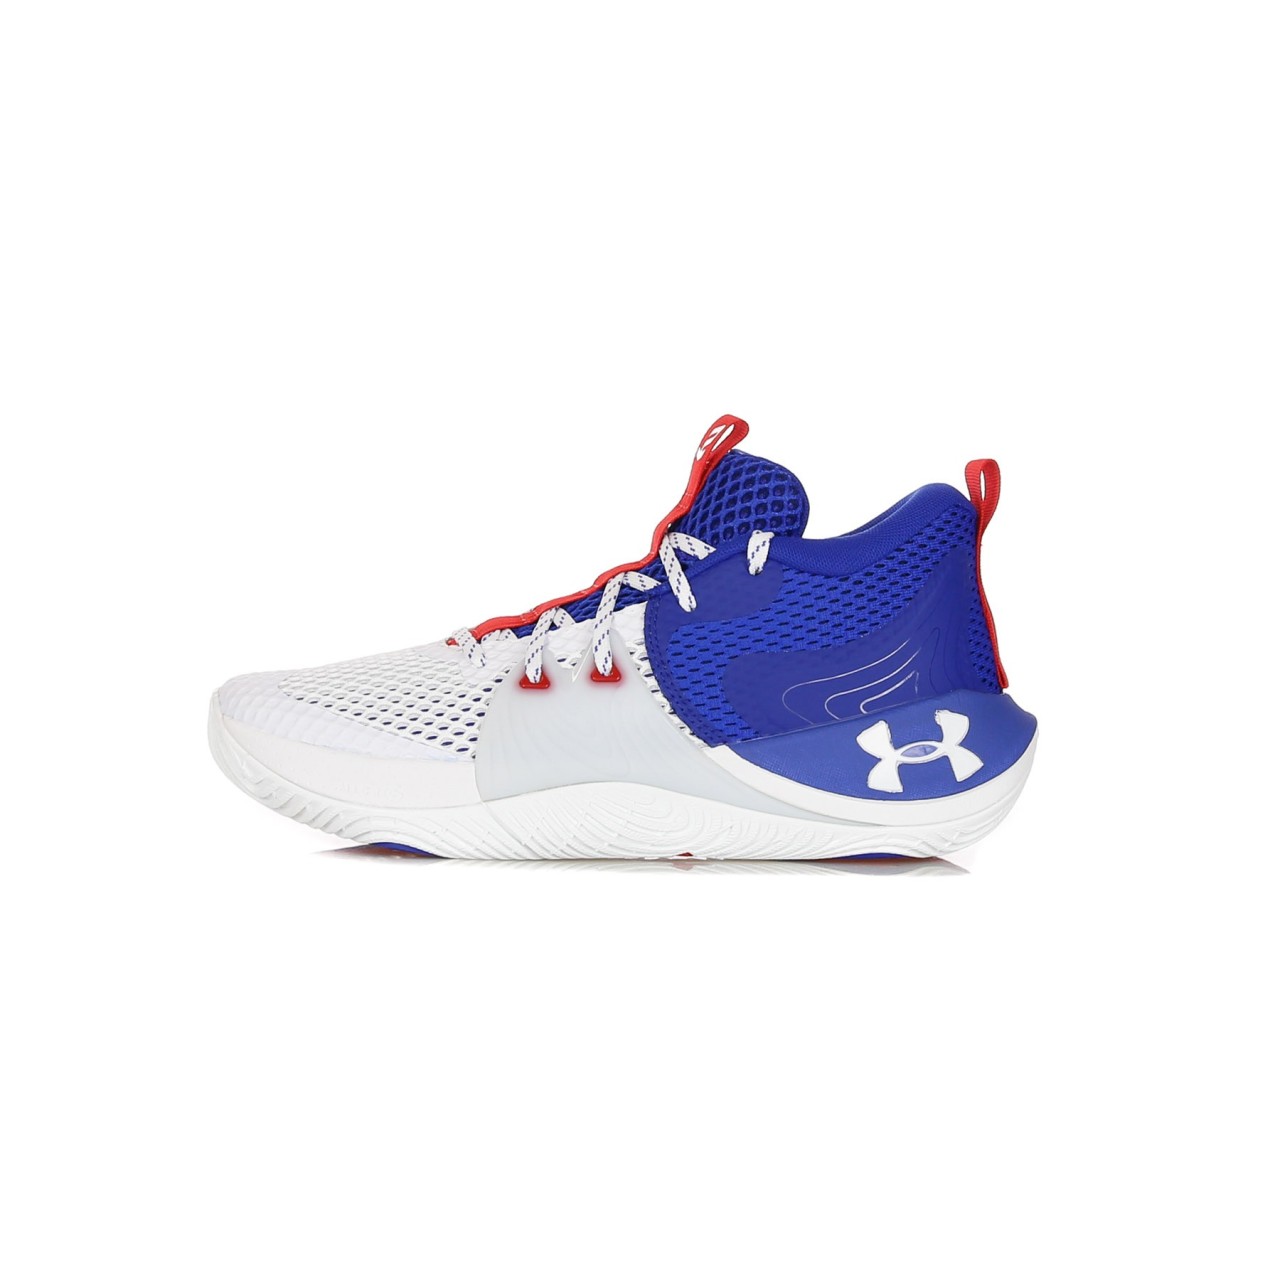 UNDER ARMOUR EMBIID 1 3023086-107